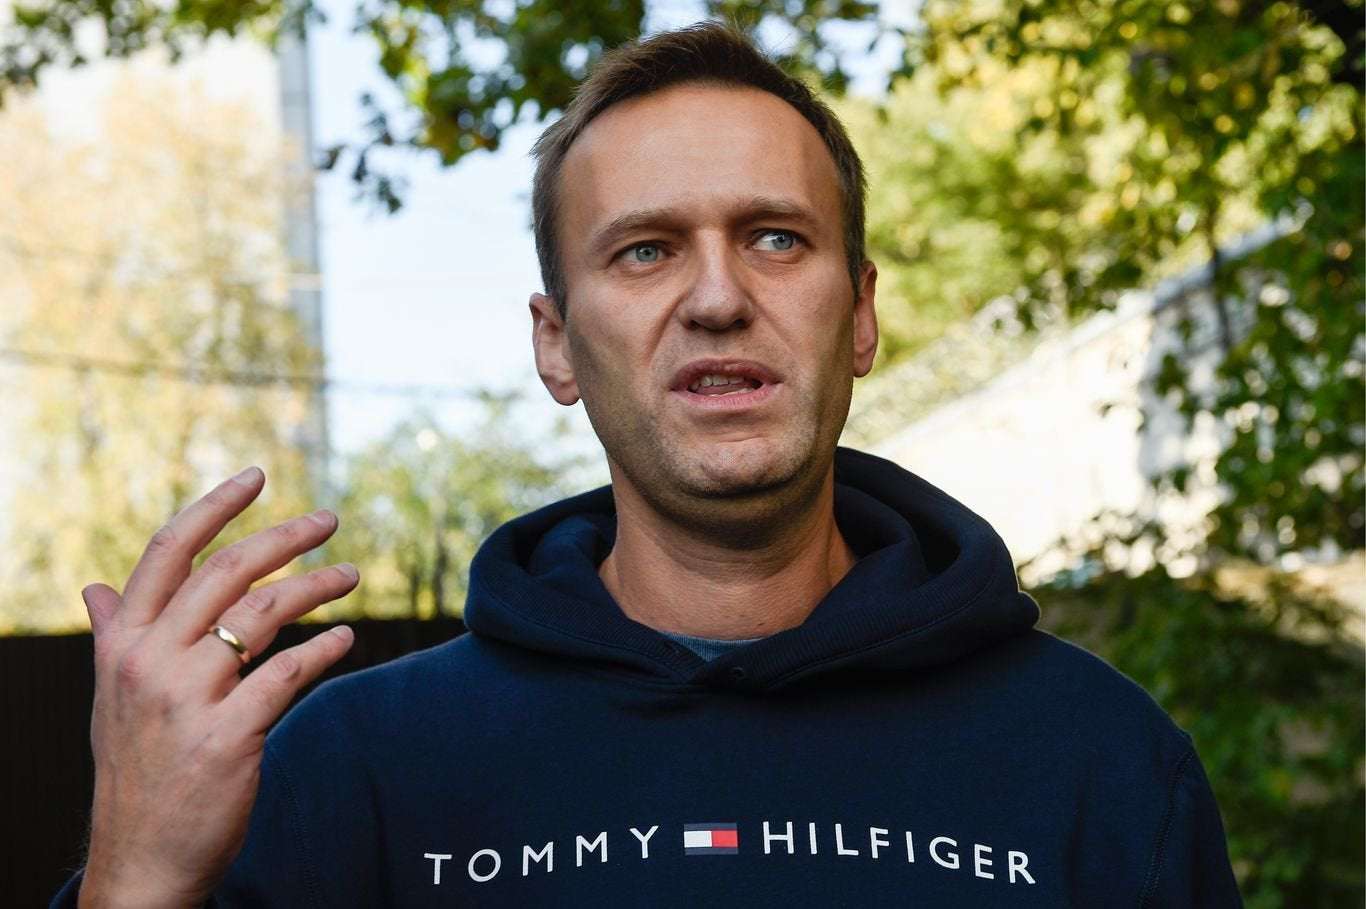 image for Putin critic Alexei Navalny in ICU after Russia poisoning — aide